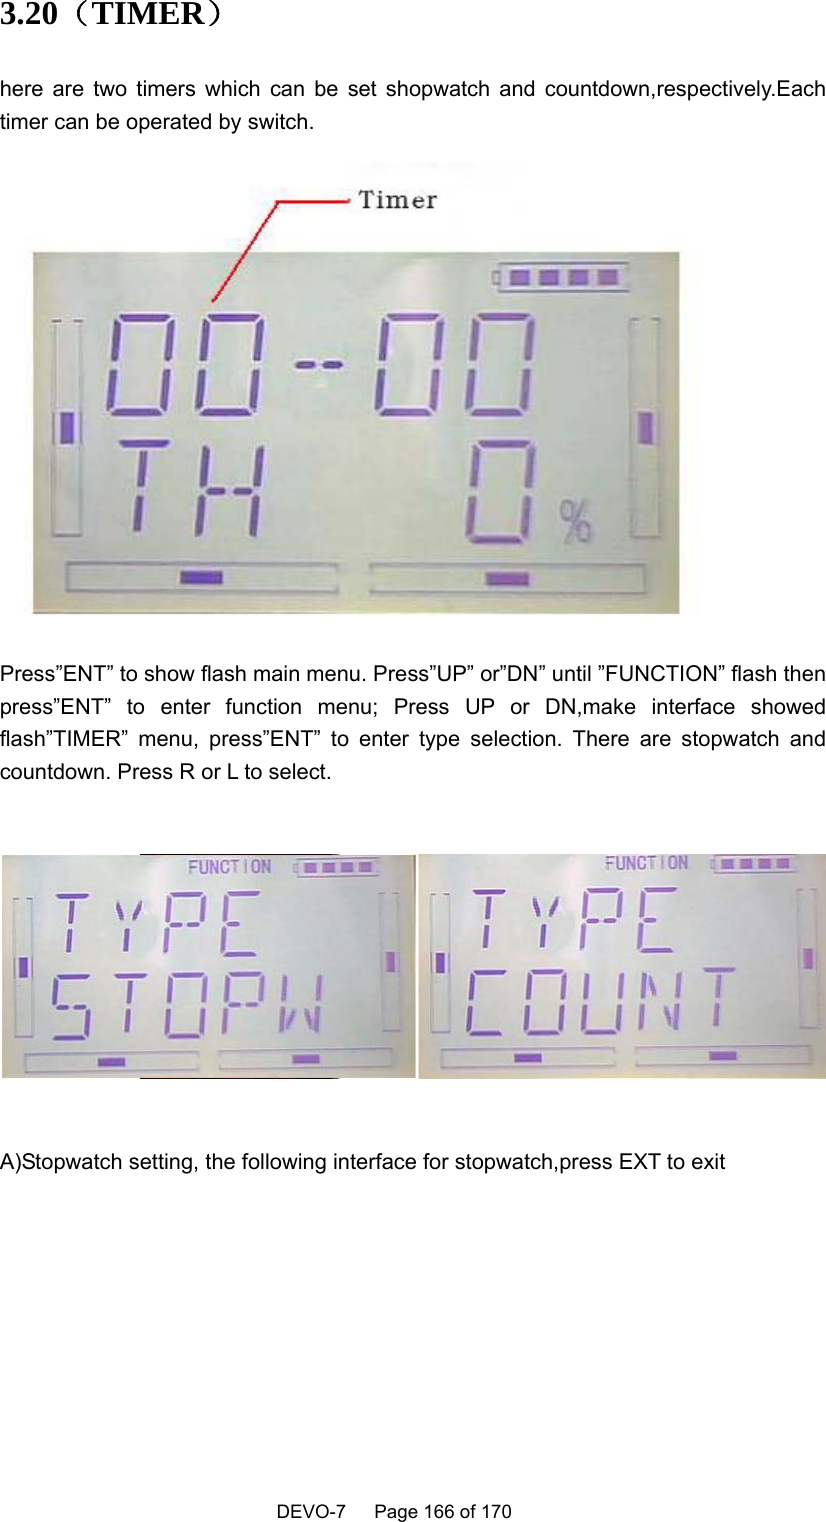    DEVO-7   Page 166 of 170    3.20（TIMER） here are two timers which can be set shopwatch and countdown,respectively.Each timer can be operated by switch.  Press”ENT” to show flash main menu. Press”UP” or”DN” until ”FUNCTION” flash then press”ENT” to enter function menu; Press UP or DN,make interface showed flash”TIMER” menu, press”ENT” to enter type selection. There are stopwatch and countdown. Press R or L to select.    A)Stopwatch setting, the following interface for stopwatch,press EXT to exit  